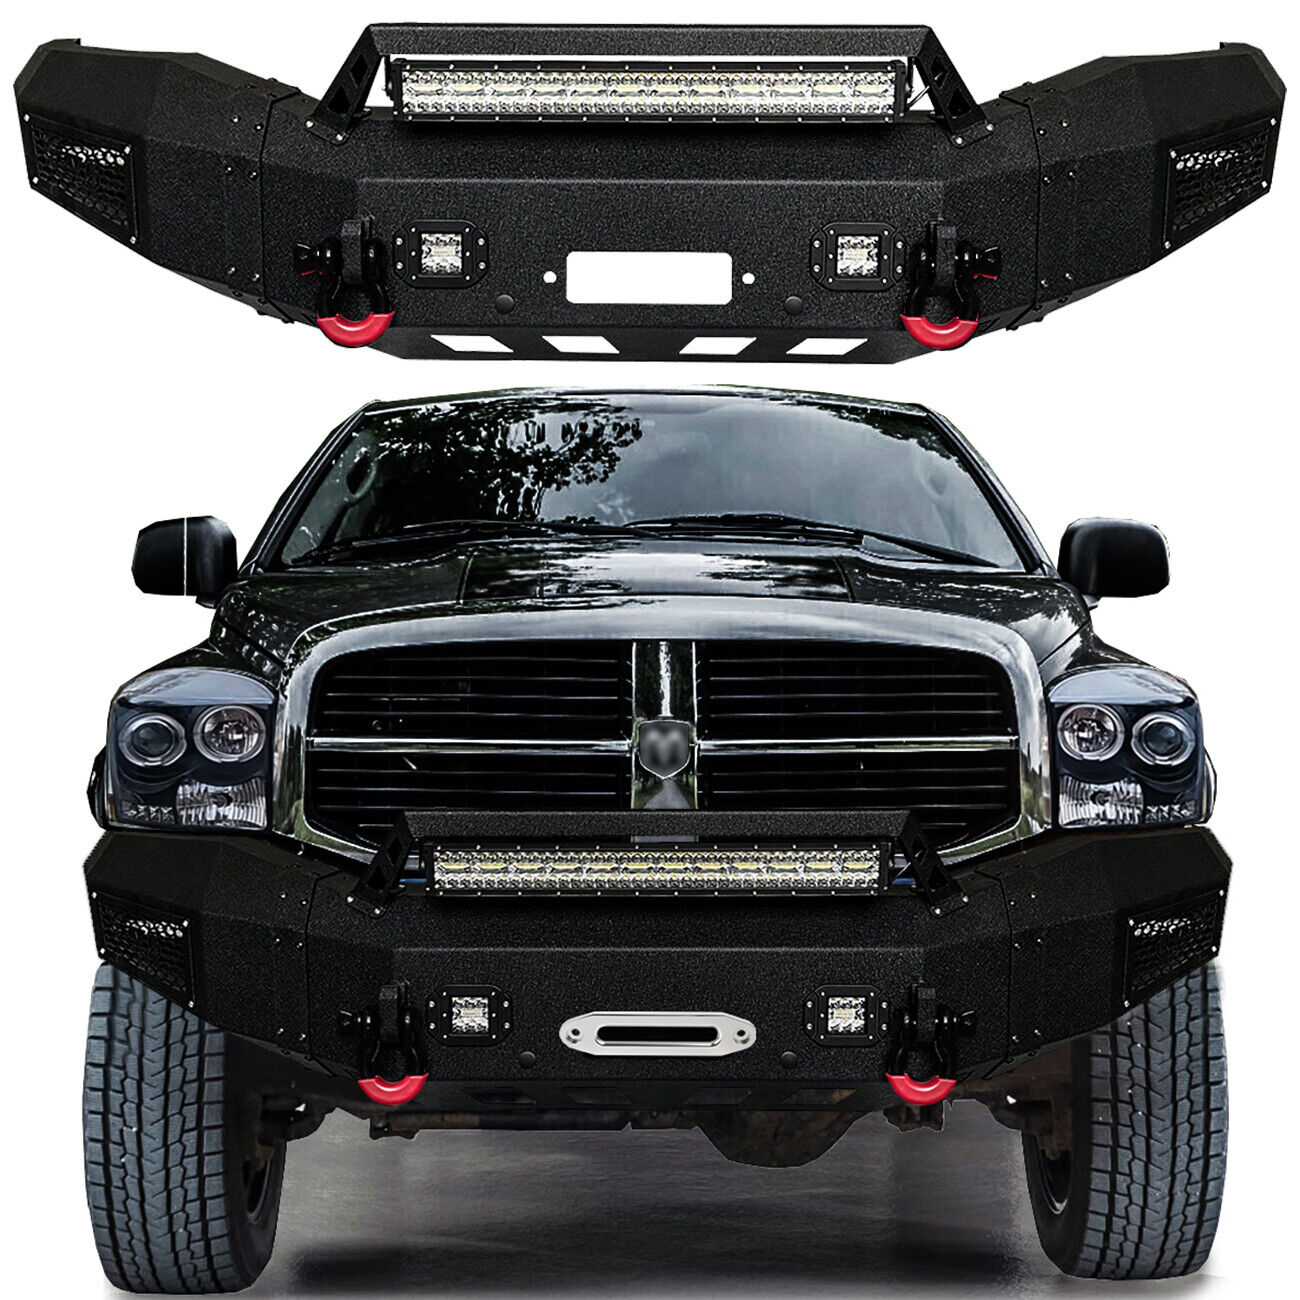 Vijay For 2006-2009 Dodge Ram 2500 3500 Front or Rear Bumper with D-Rings